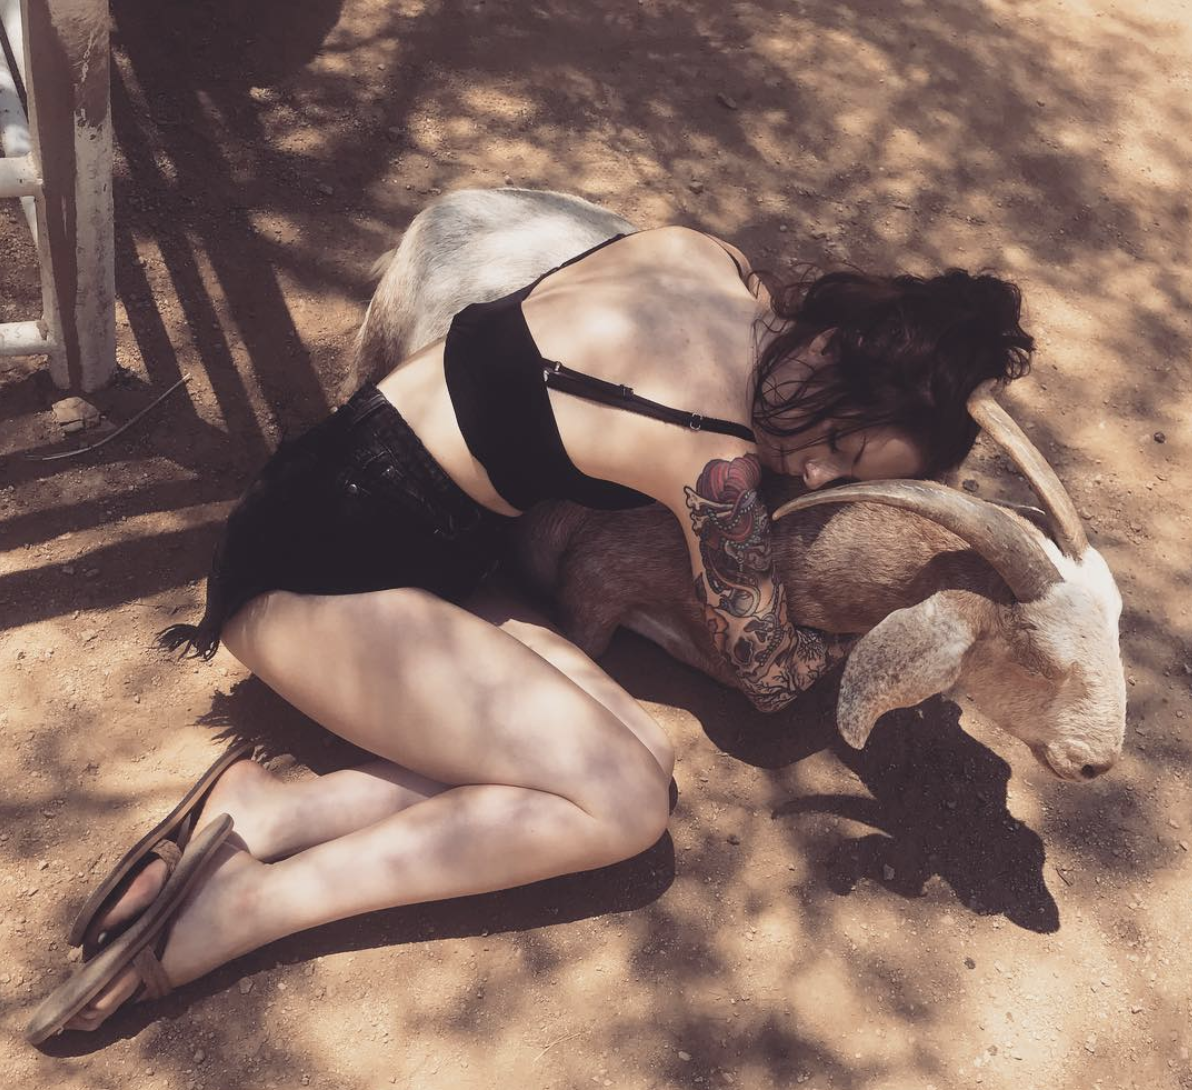 Victoria Eden lying with goat